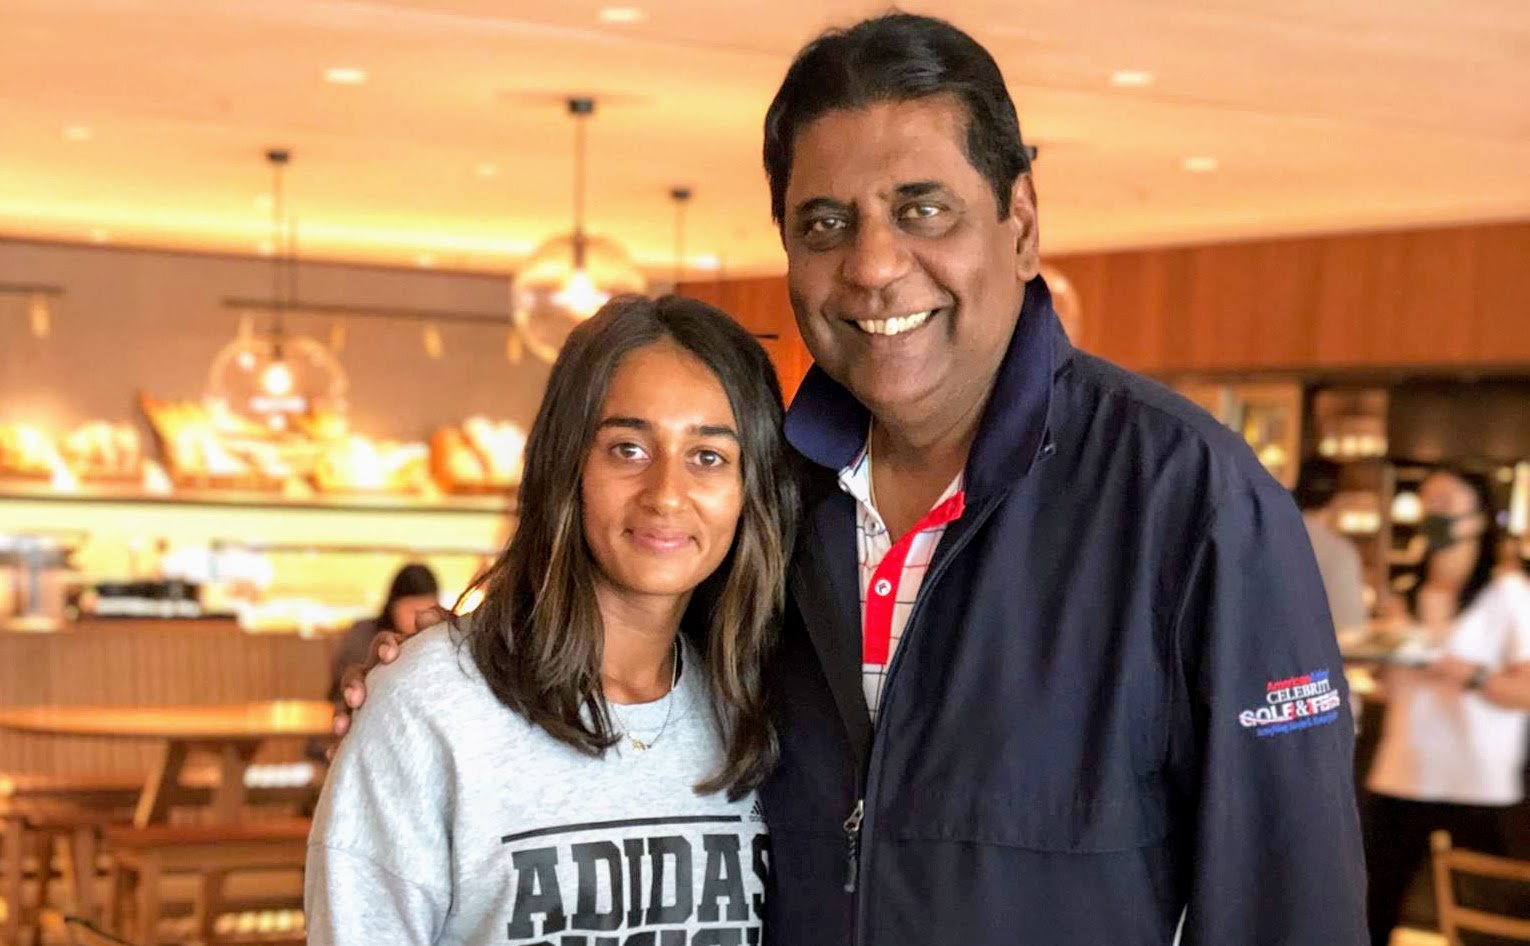 “Watching Vijay Amritraj play on TV against the world’s best, an Indian from India, it was almost like he is representing me over there” – Gurnake Bains on the inspiration behind his and Naiktha’s journey into Tennis